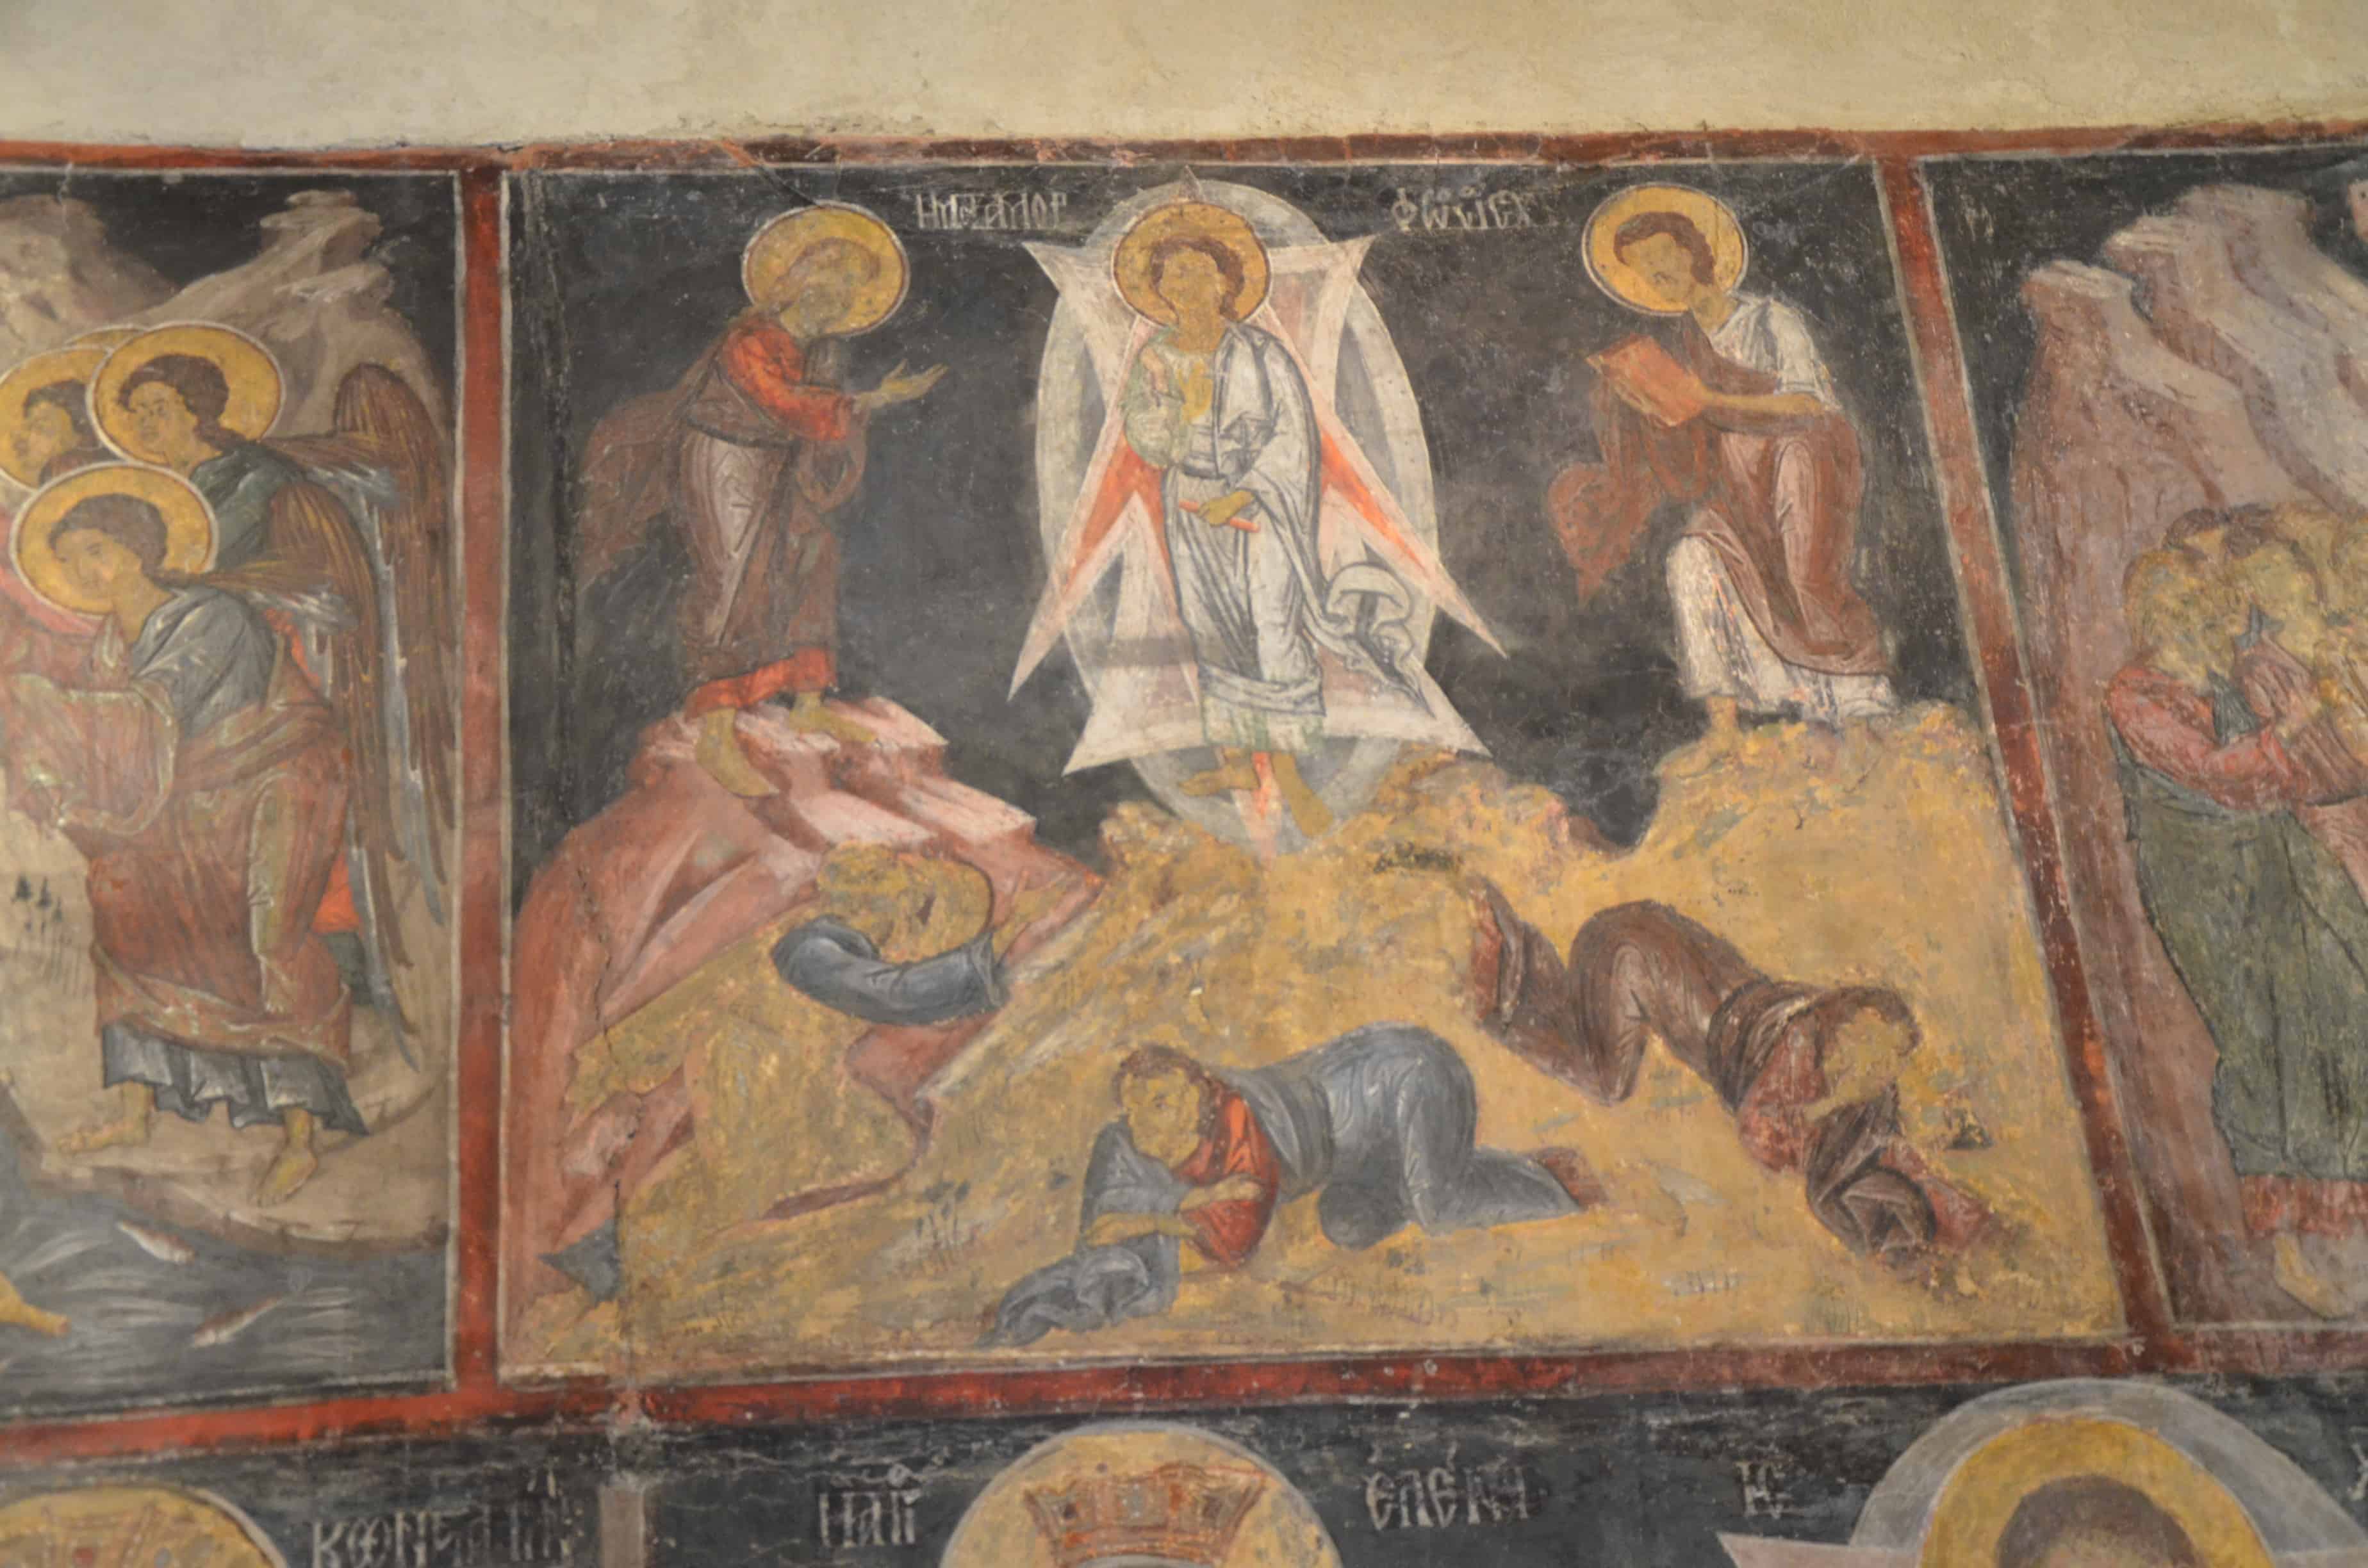 Fresco of the Transfiguration in the Church of the Holy Saviour in Nessebar, Bulgaria